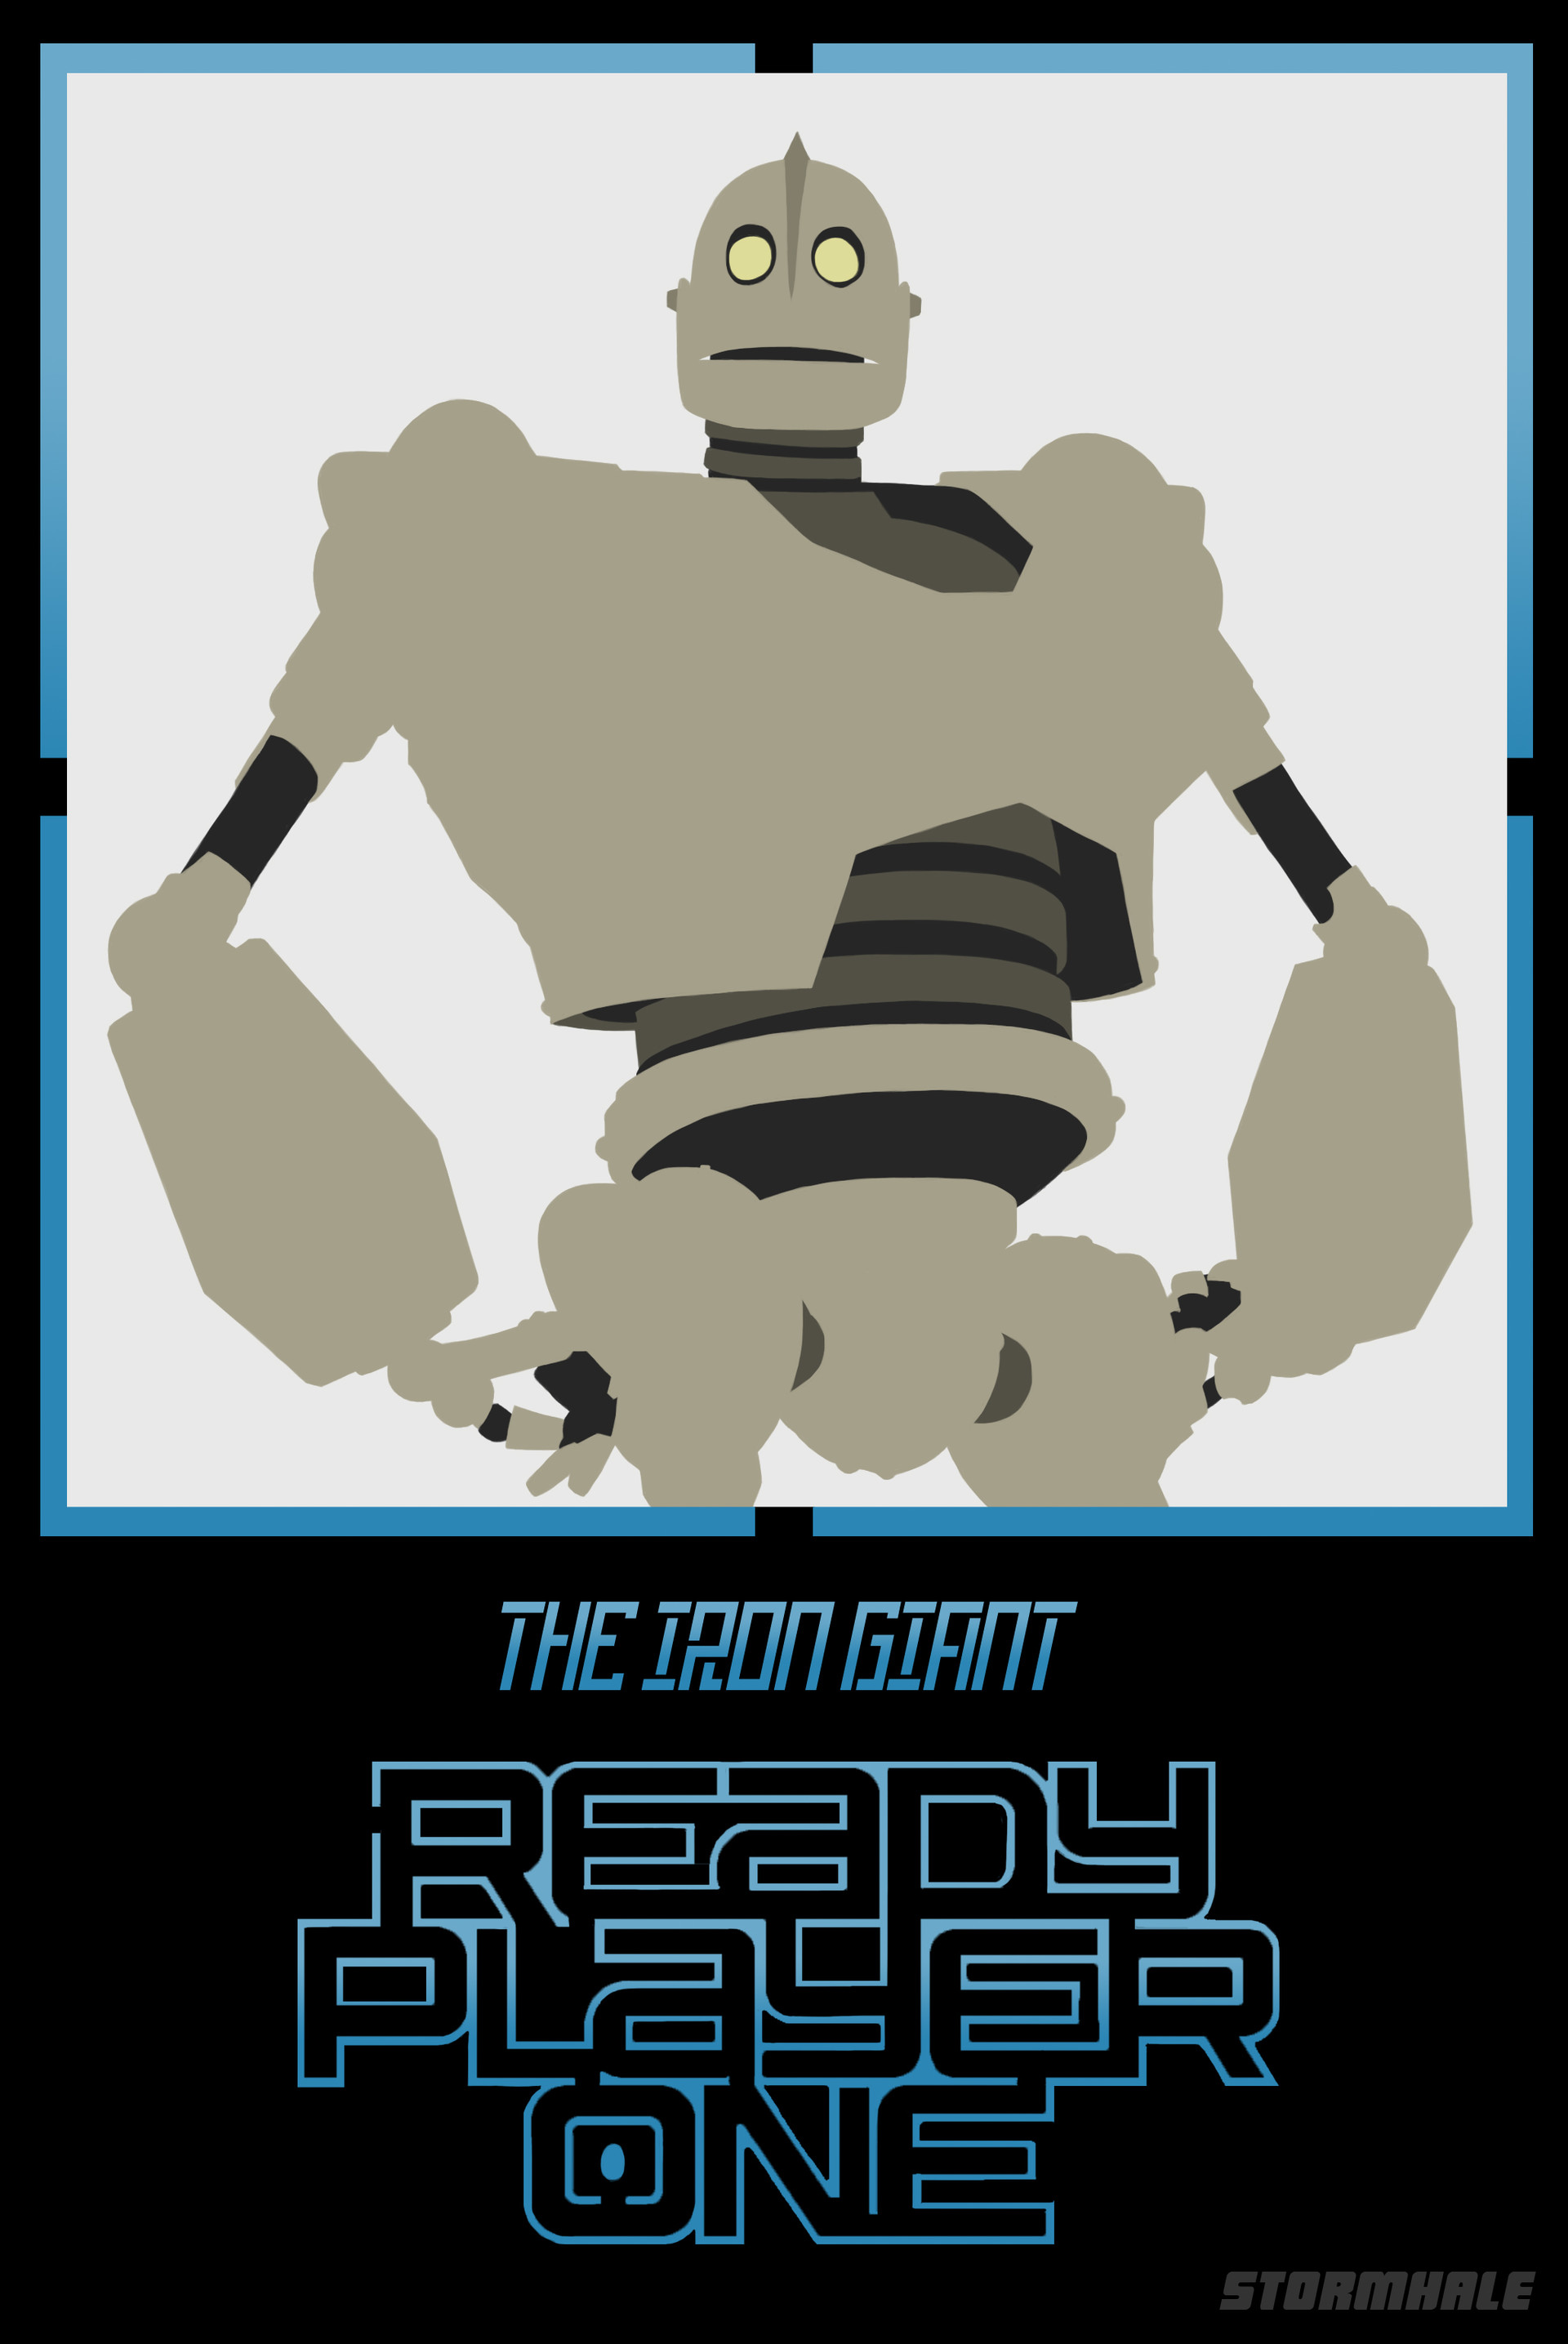 Ready Player One Dream Trailer & Iron Giant Poster